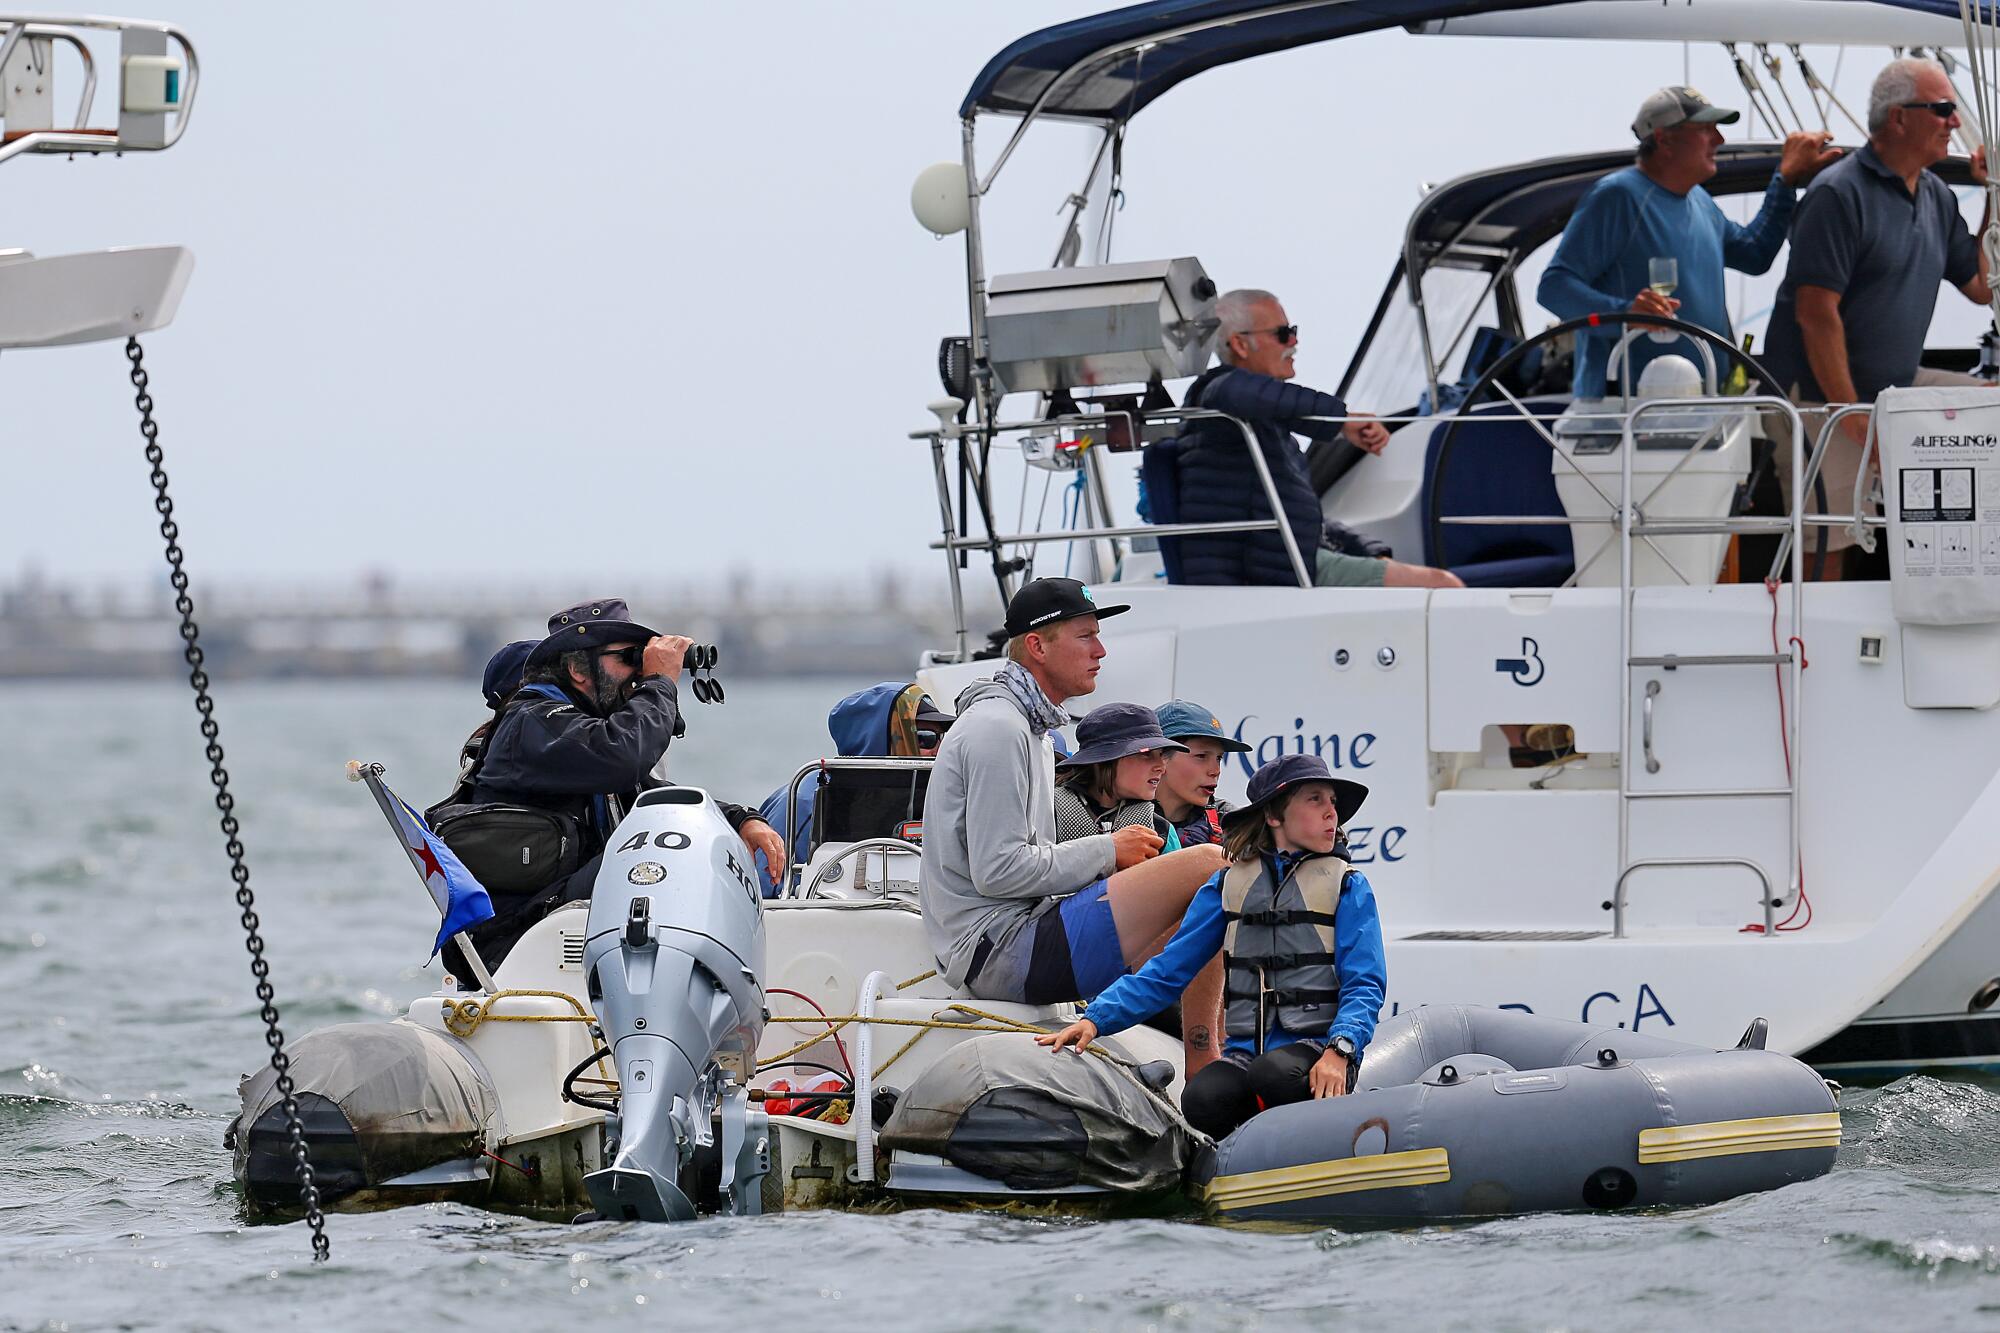 Spectators watch from a sailboat in San Pedro Oracle Los Angeles Sail Grand Prix 